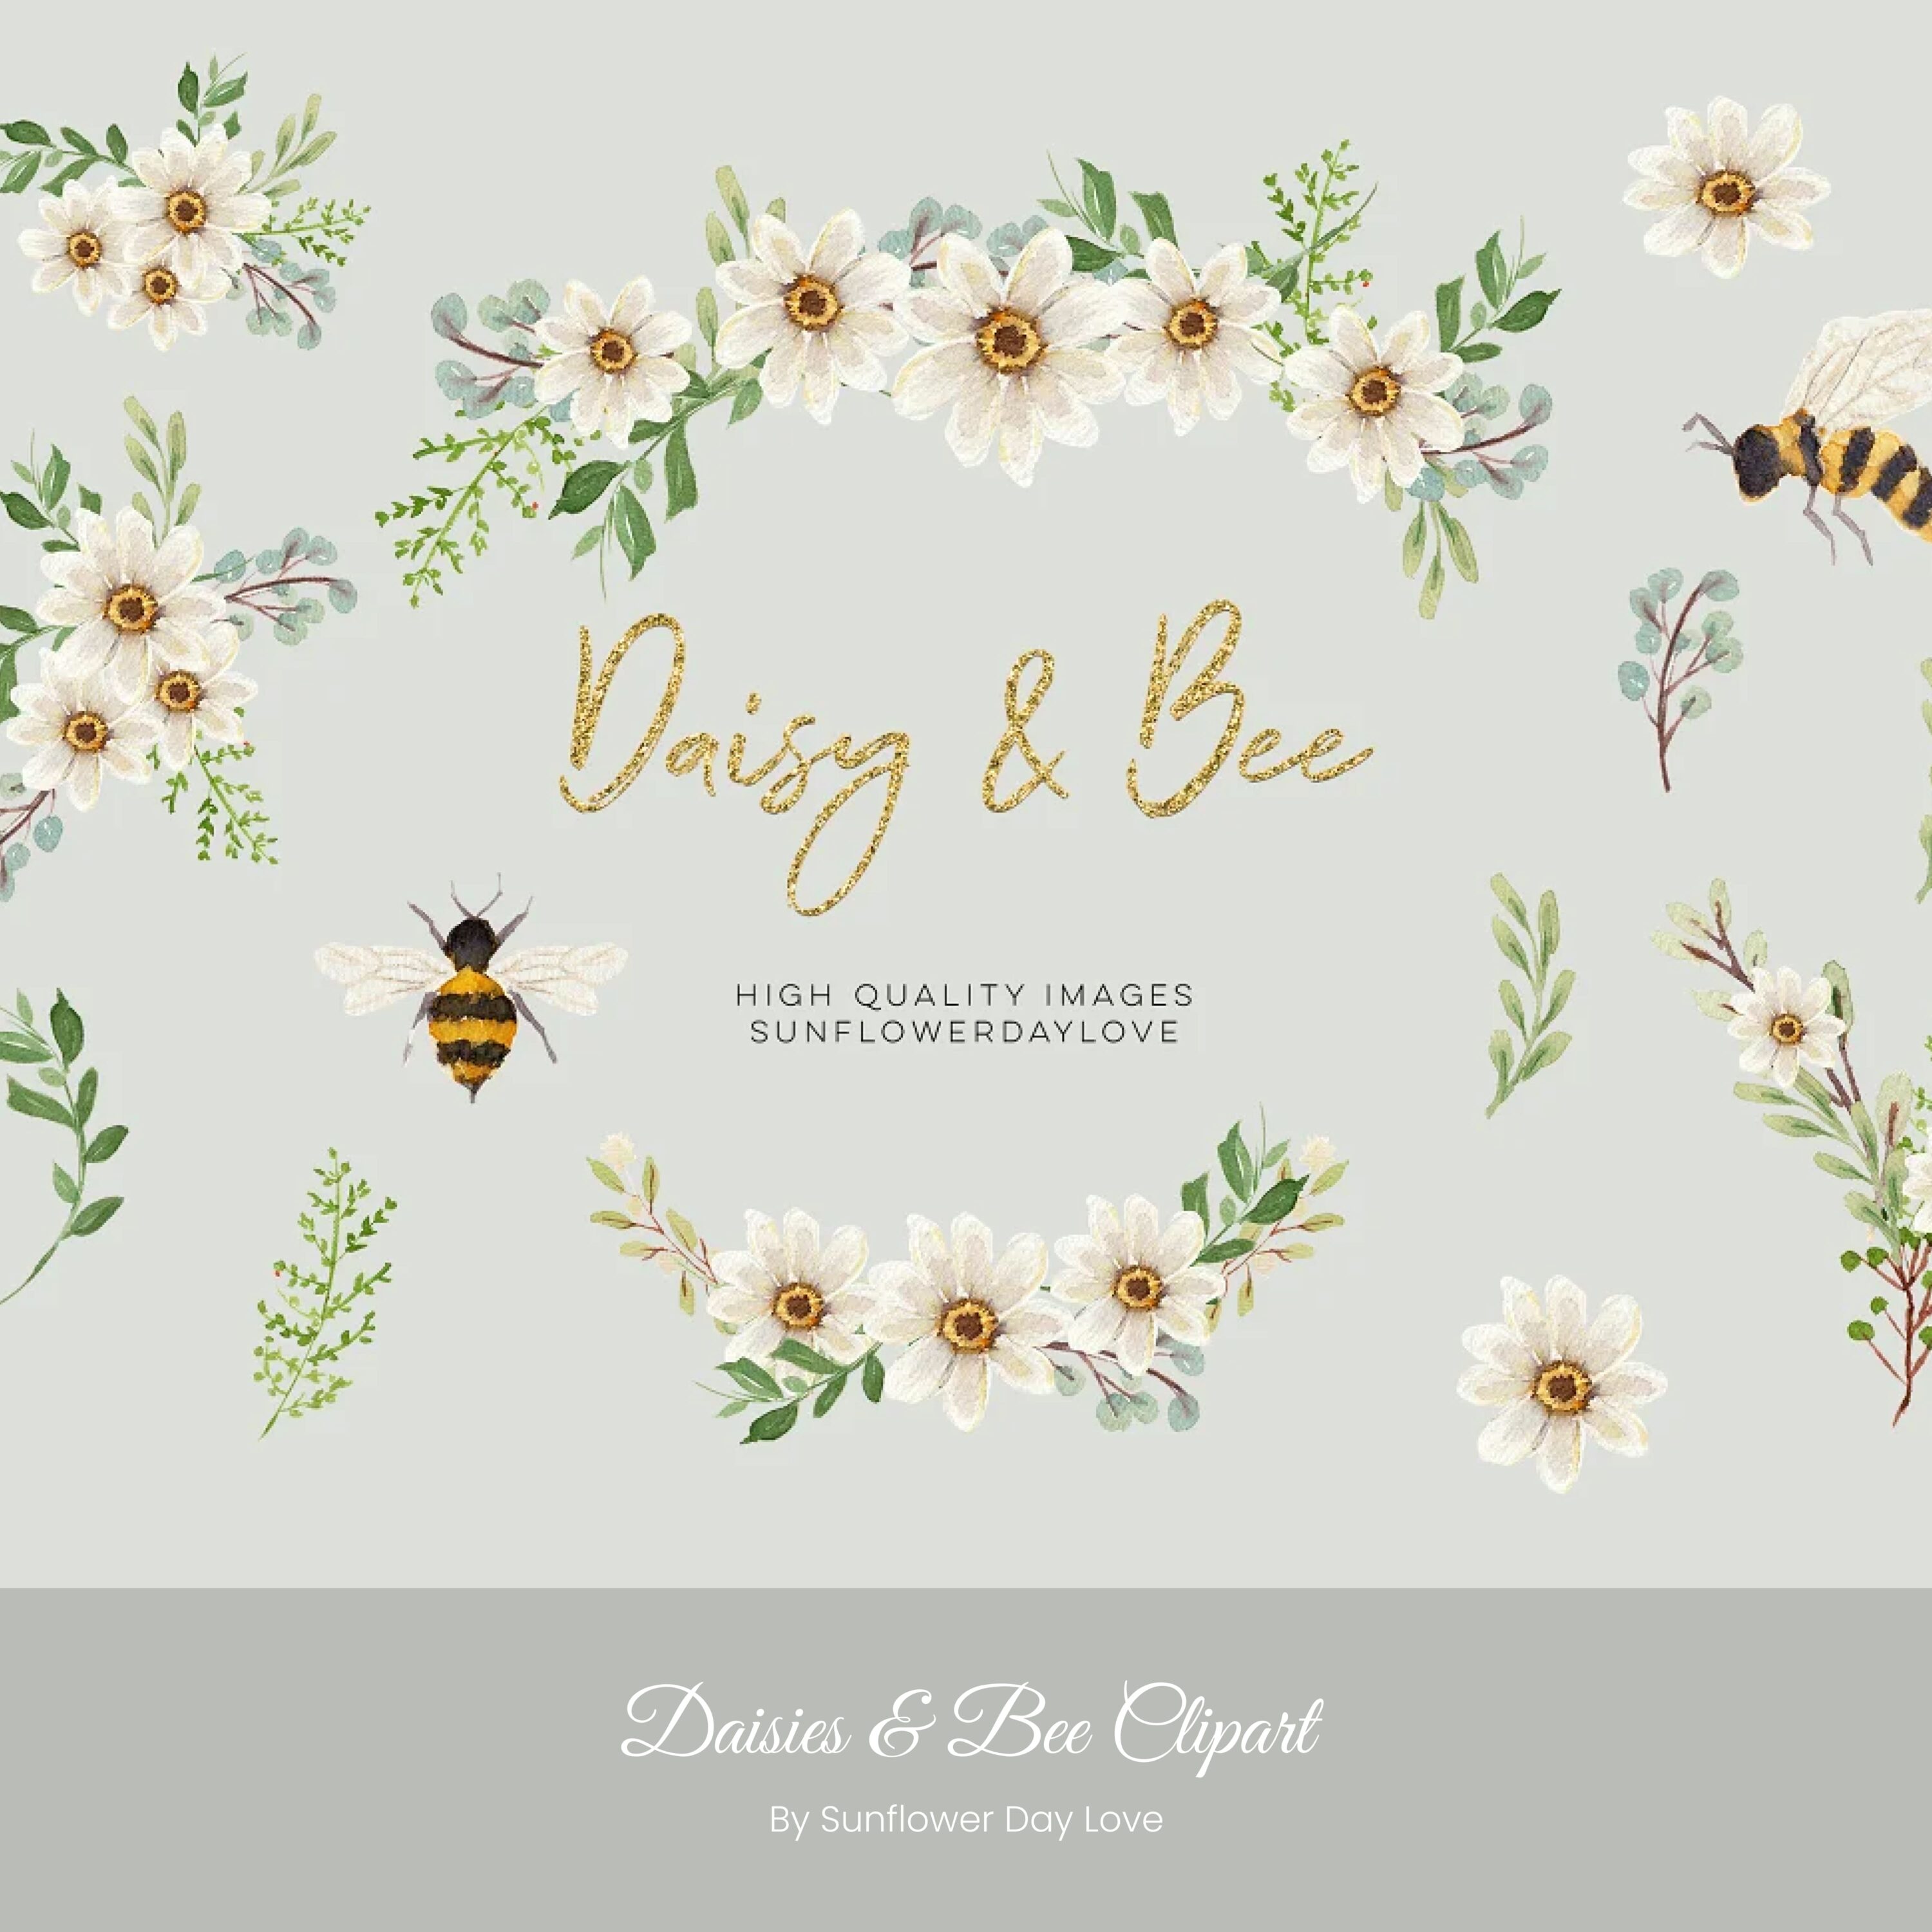 Daisies & Bee Clipart.